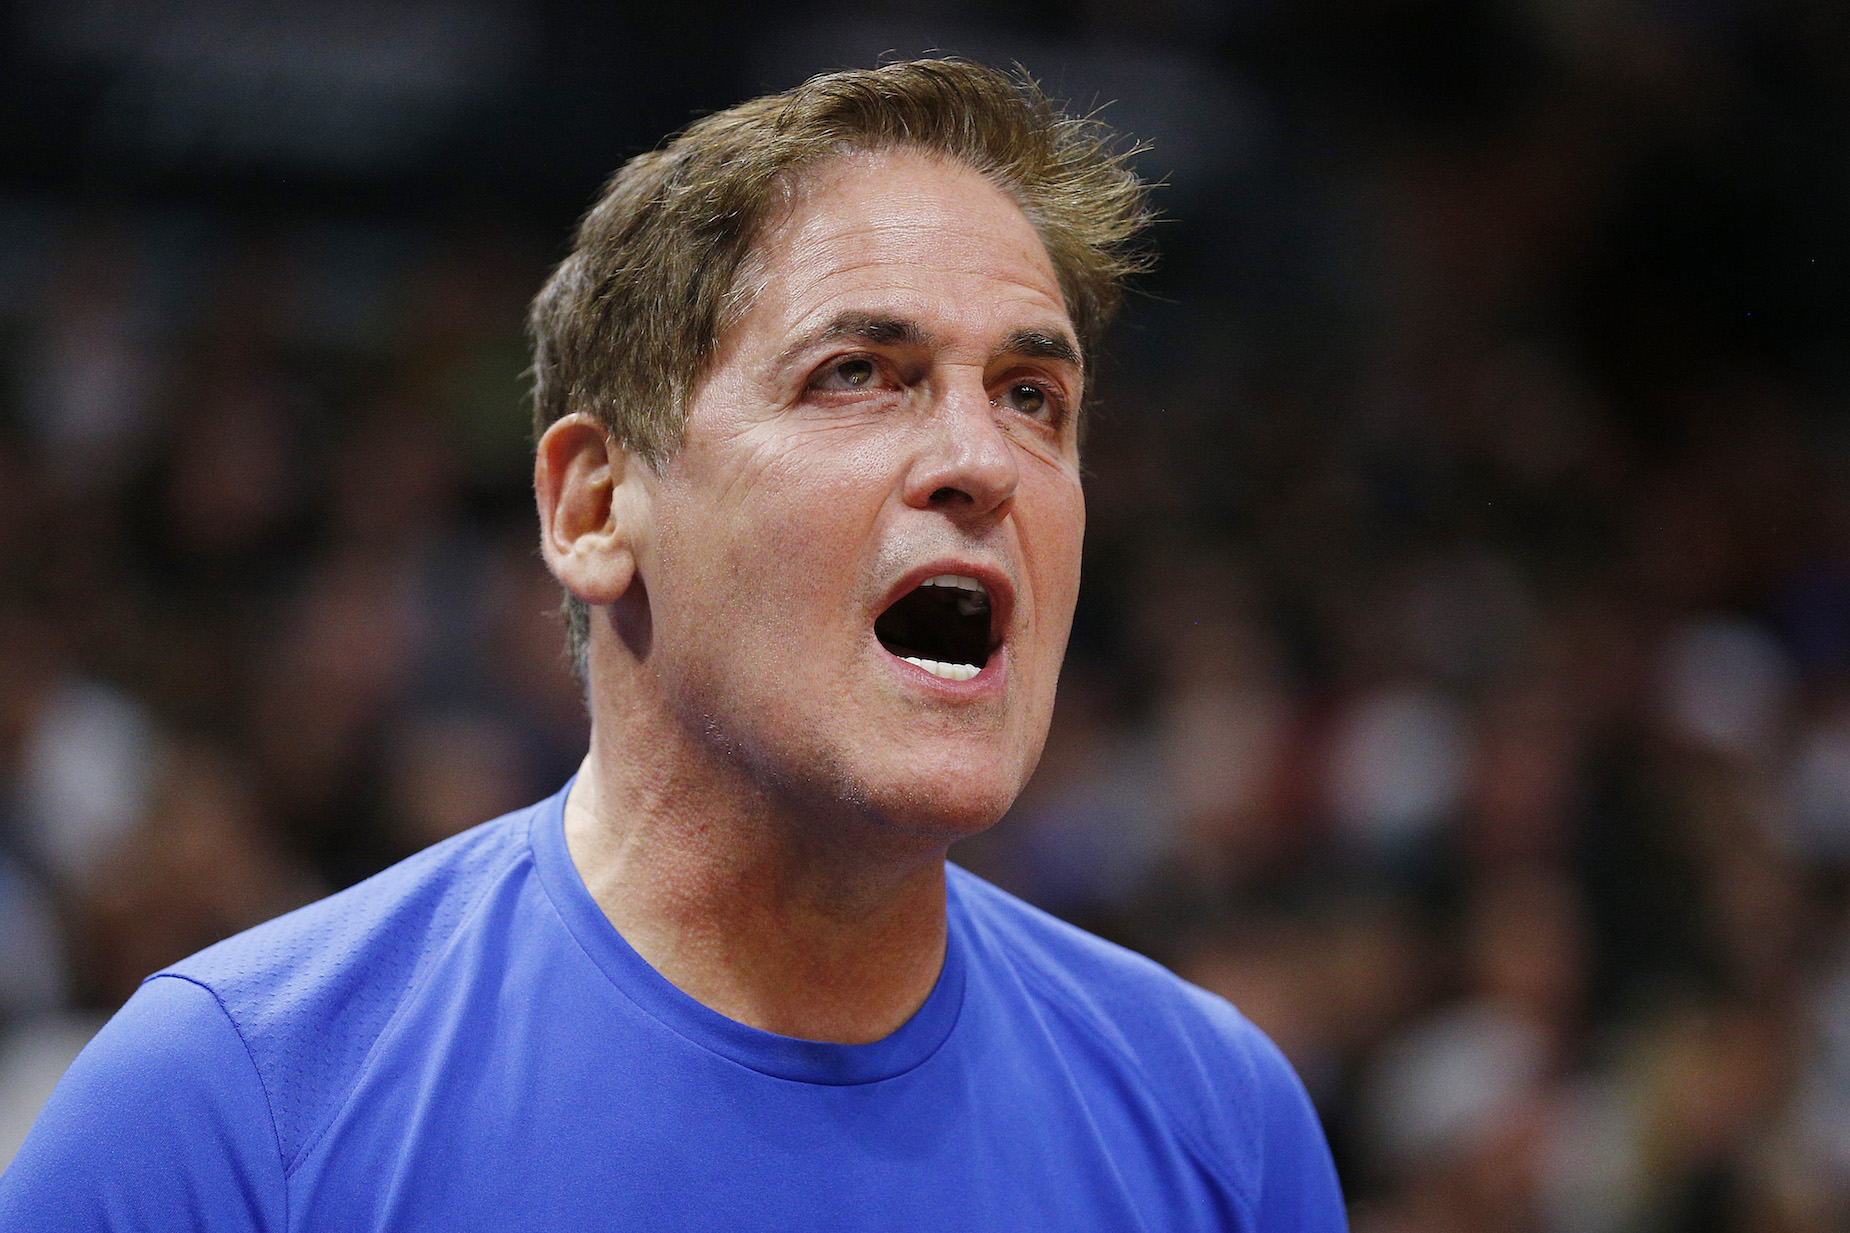 Dallas Mavericks owner Mark Cuban recently raise eyebrows with a comment about LeBron James.